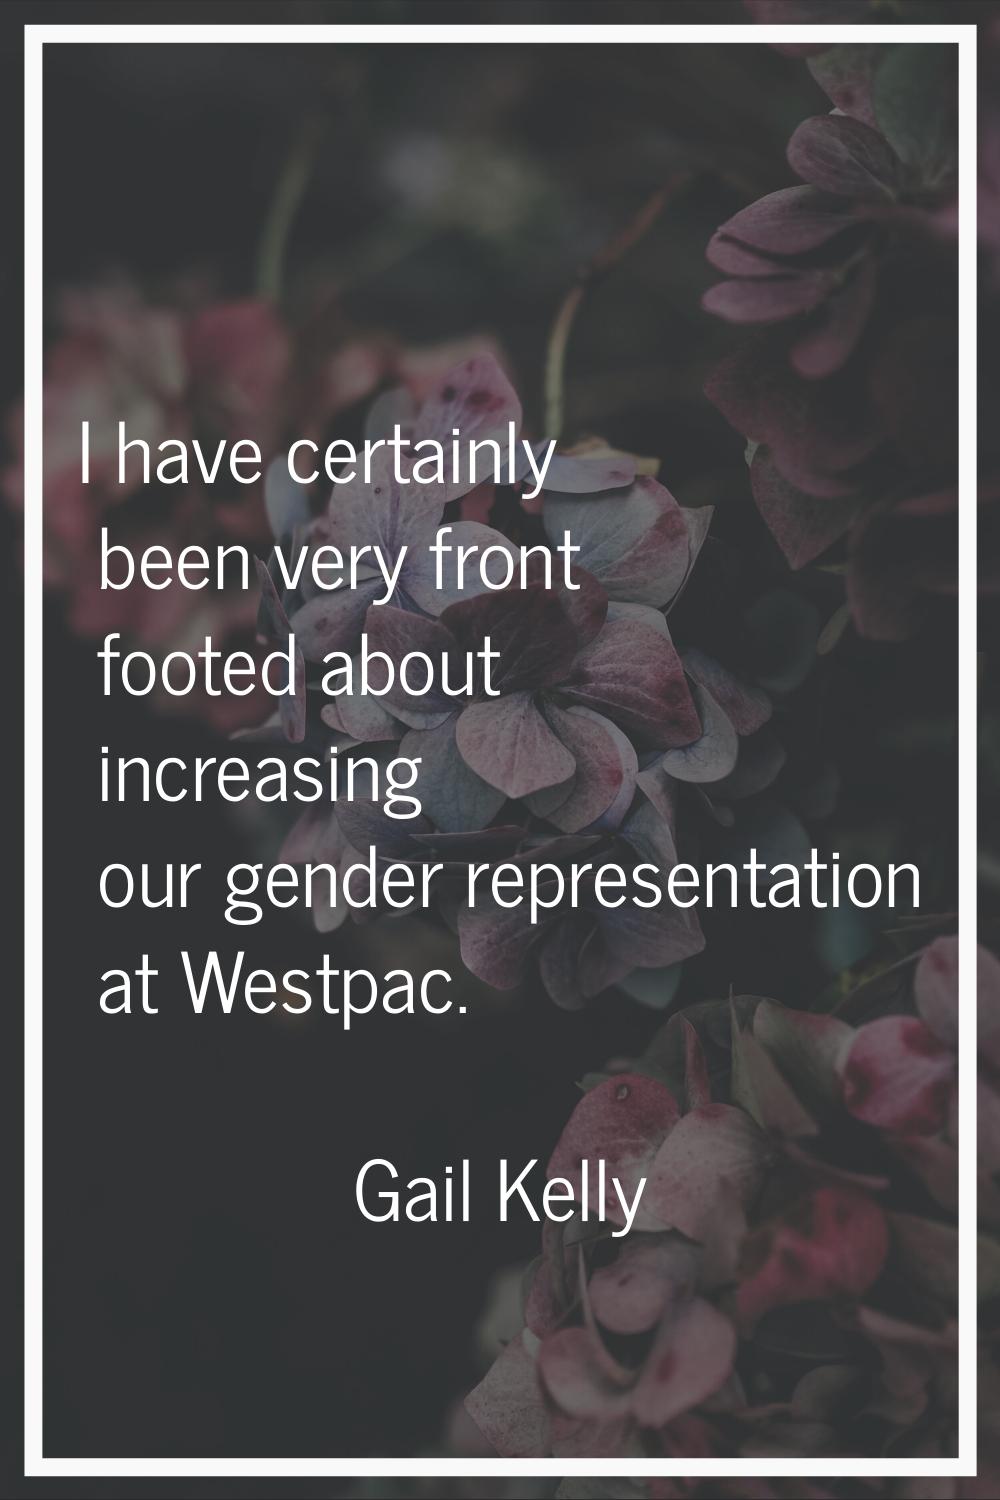 I have certainly been very front footed about increasing our gender representation at Westpac.